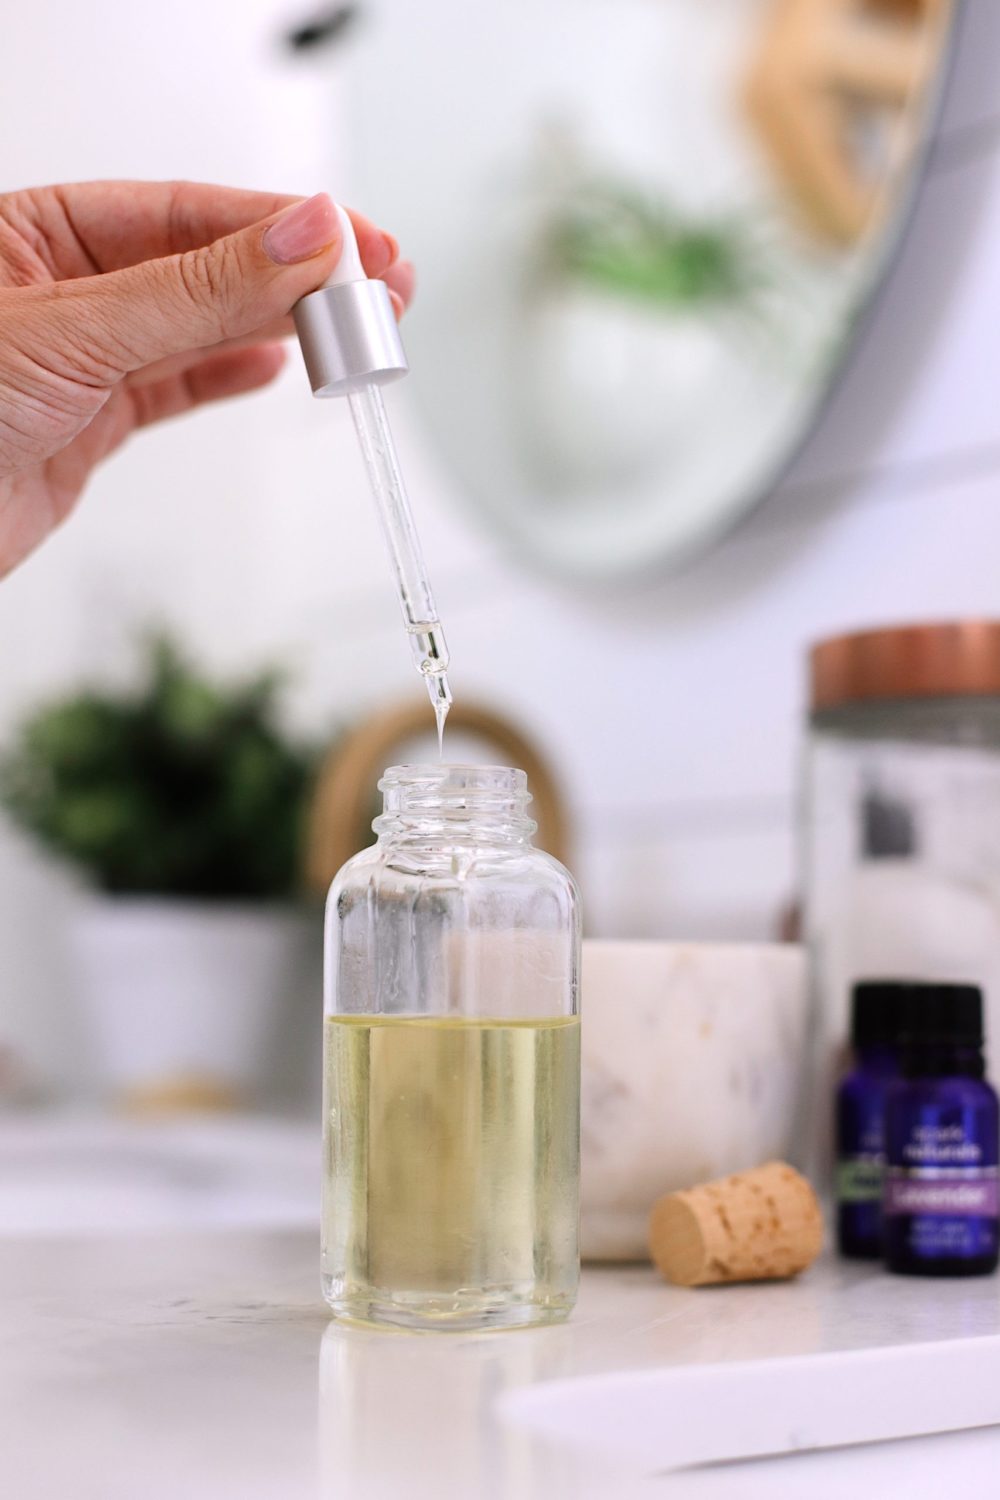 DIY Hair Growth Oil with Essential Oils Perfect for Postpartum Hair Fall. This healthy DIY scalp oil for hair growth is loaded with essential oils that boast anti-inflammatory and anti-bacterial properties that help in combating hair fall, stimulating the scalp for growth and more.